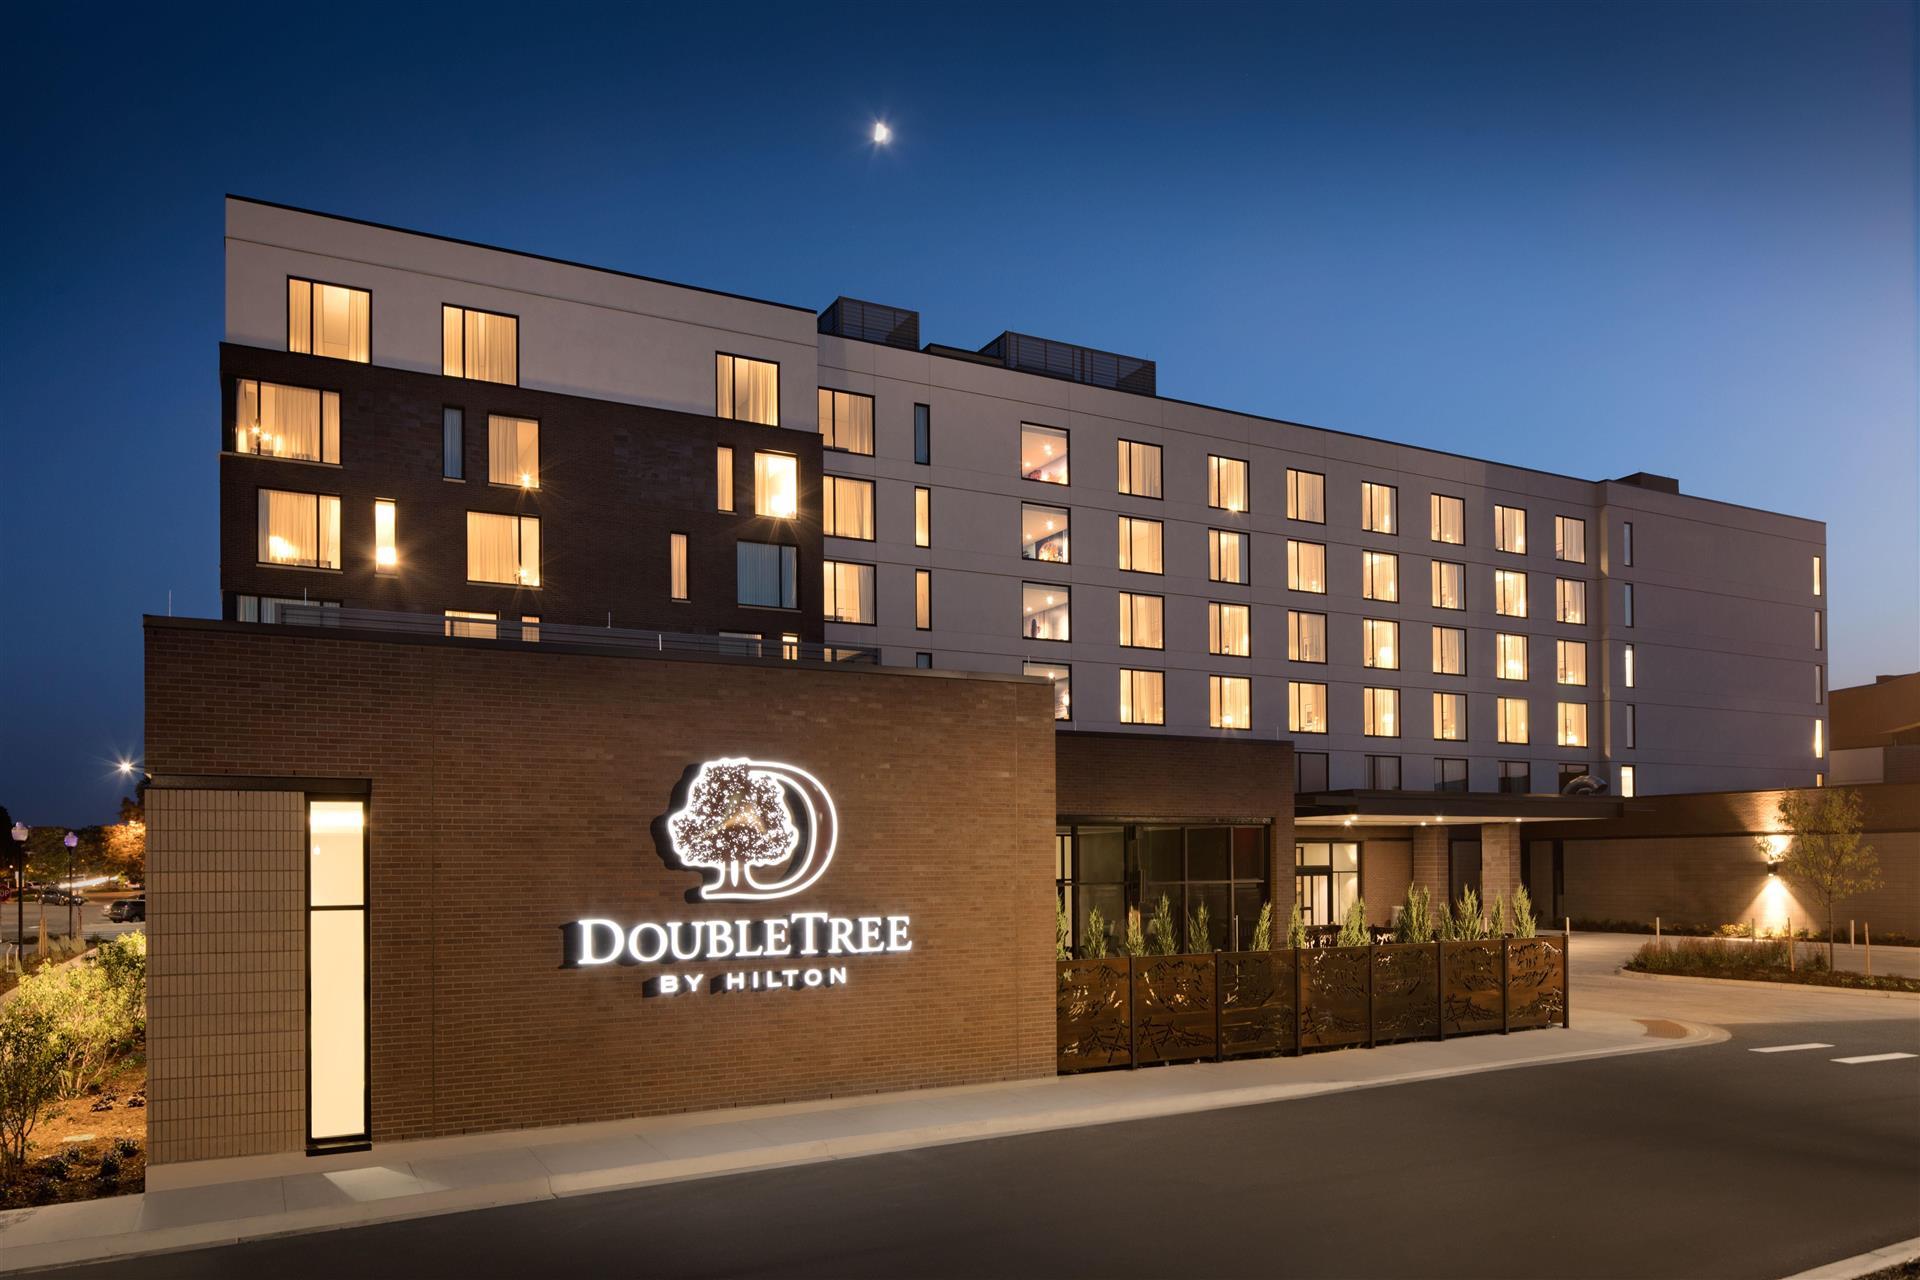 DoubleTree by Hilton Greeley at Lincoln Park in Greeley, CO